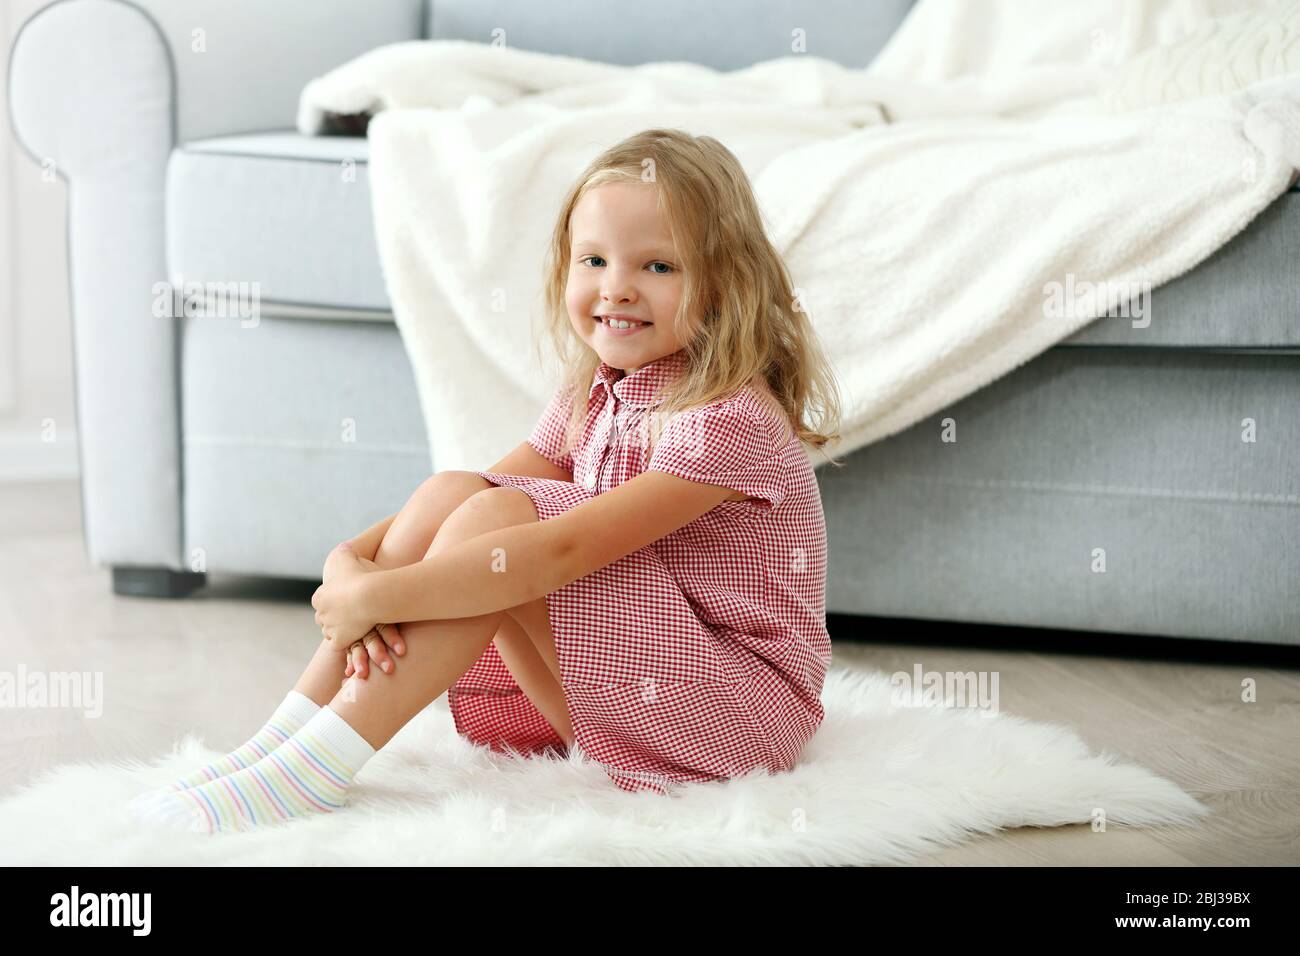 Little girl in the room Stock Photo - Alamy